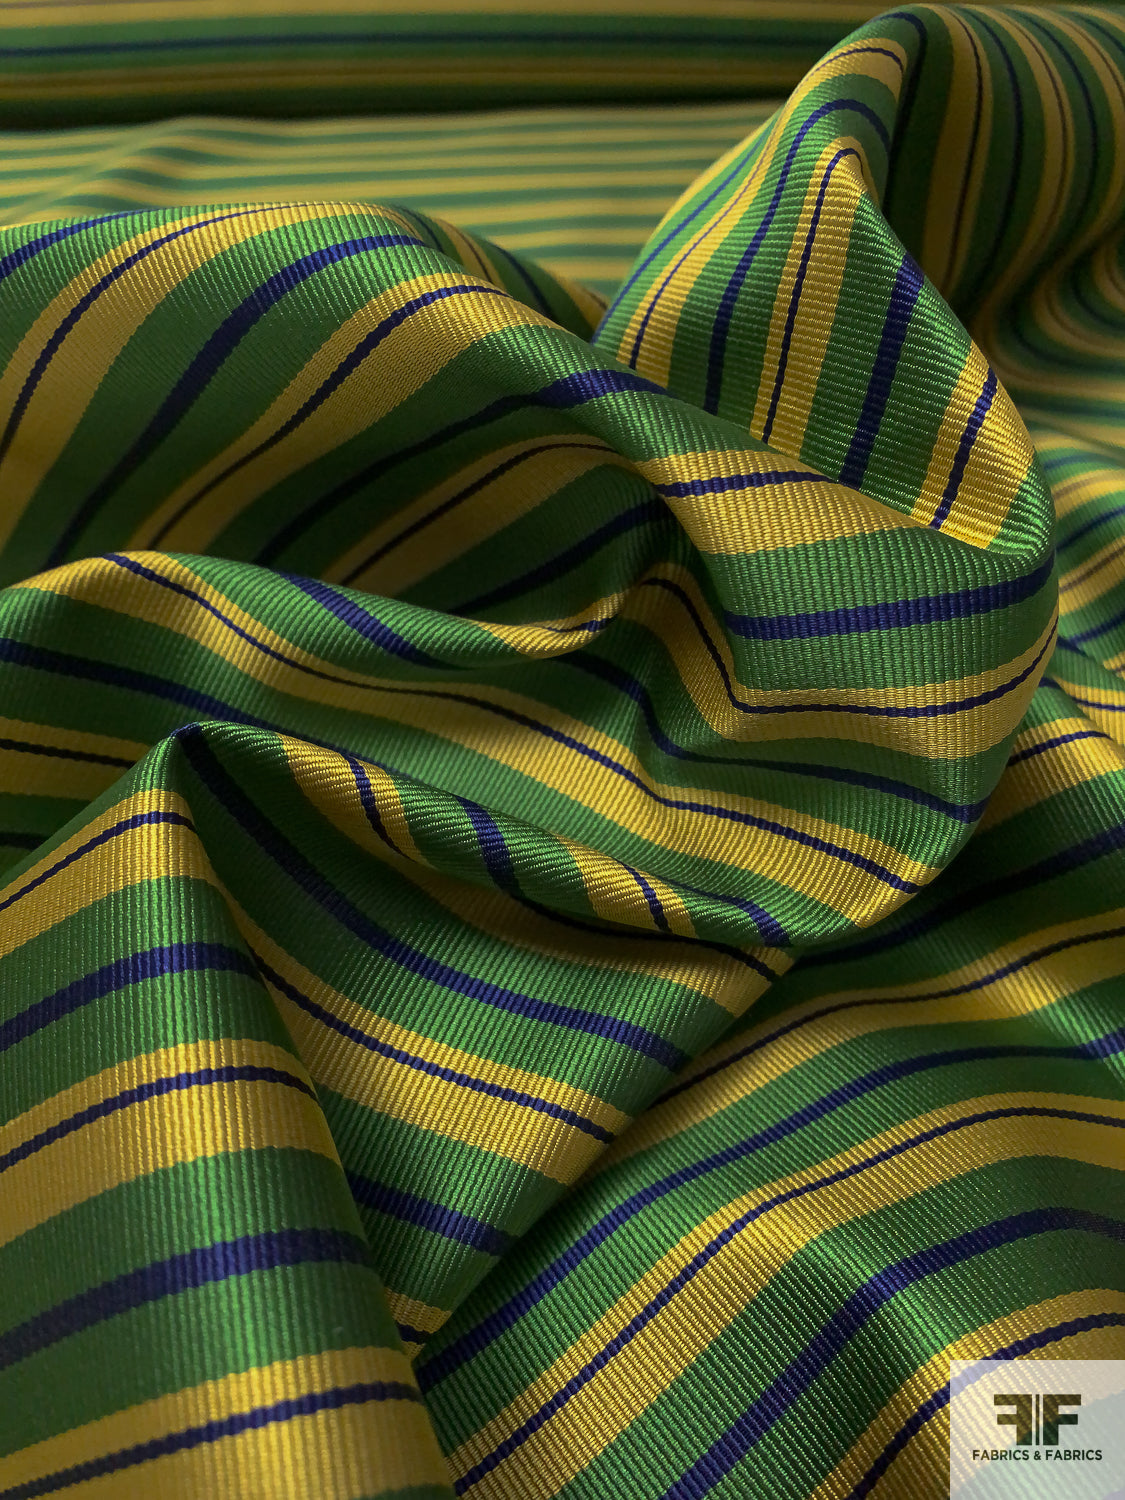 Horizontal Striped Polyester Necktie Jacquard Brocade with Fused Back - Green / Blue / Yellow